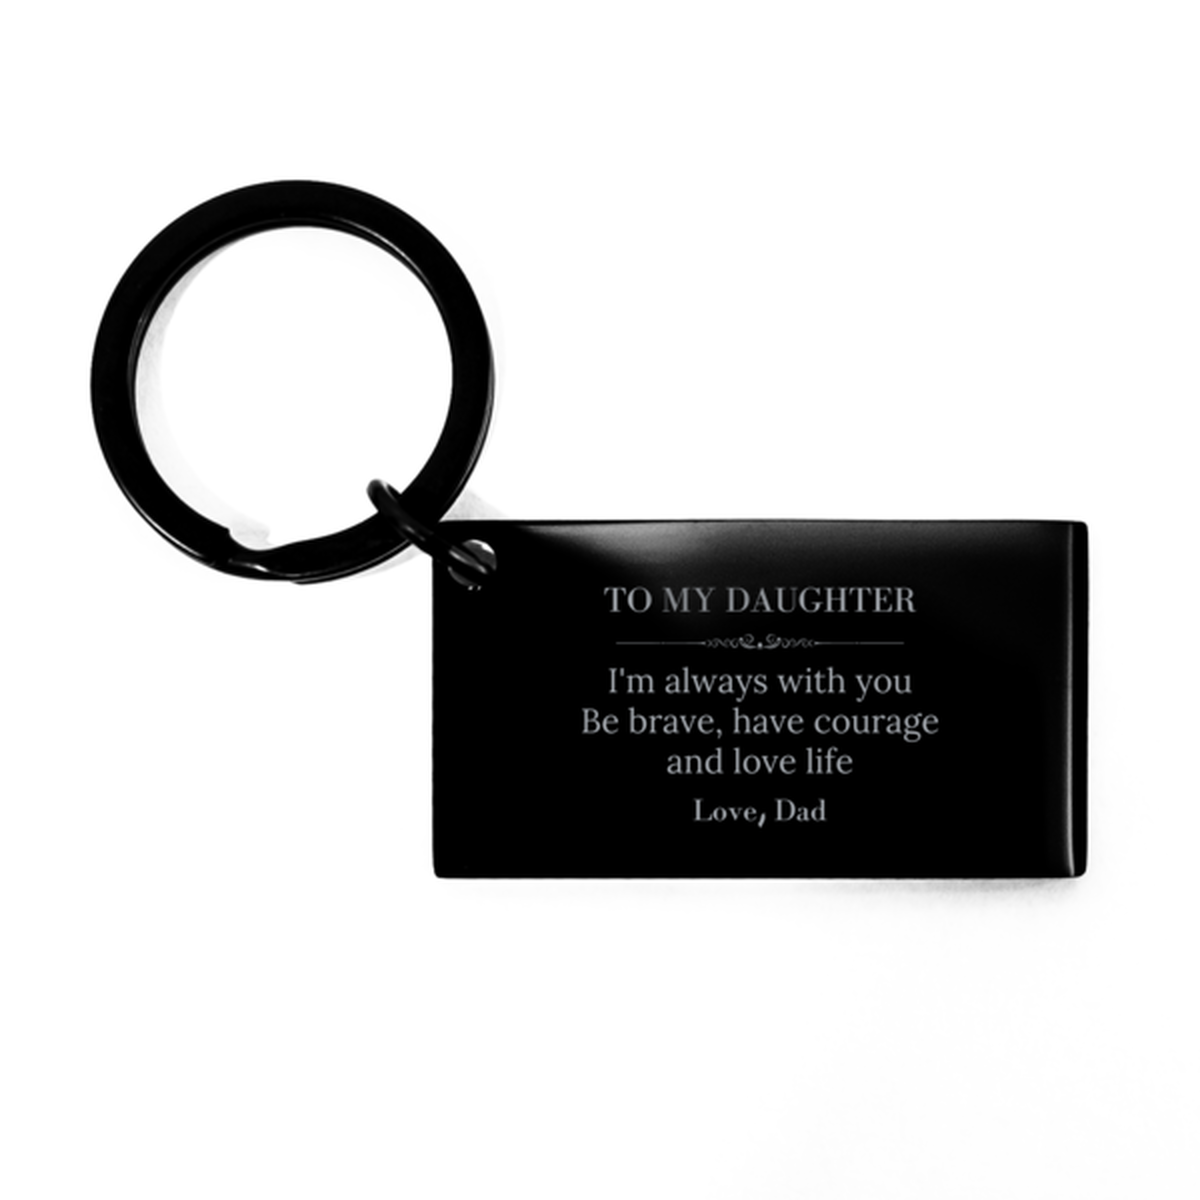 To My Daughter Gifts from Dad, Unique Keychain Inspirational Christmas Birthday Graduation Gifts for Daughter I'm always with you. Be brave, have courage and love life. Love, Dad